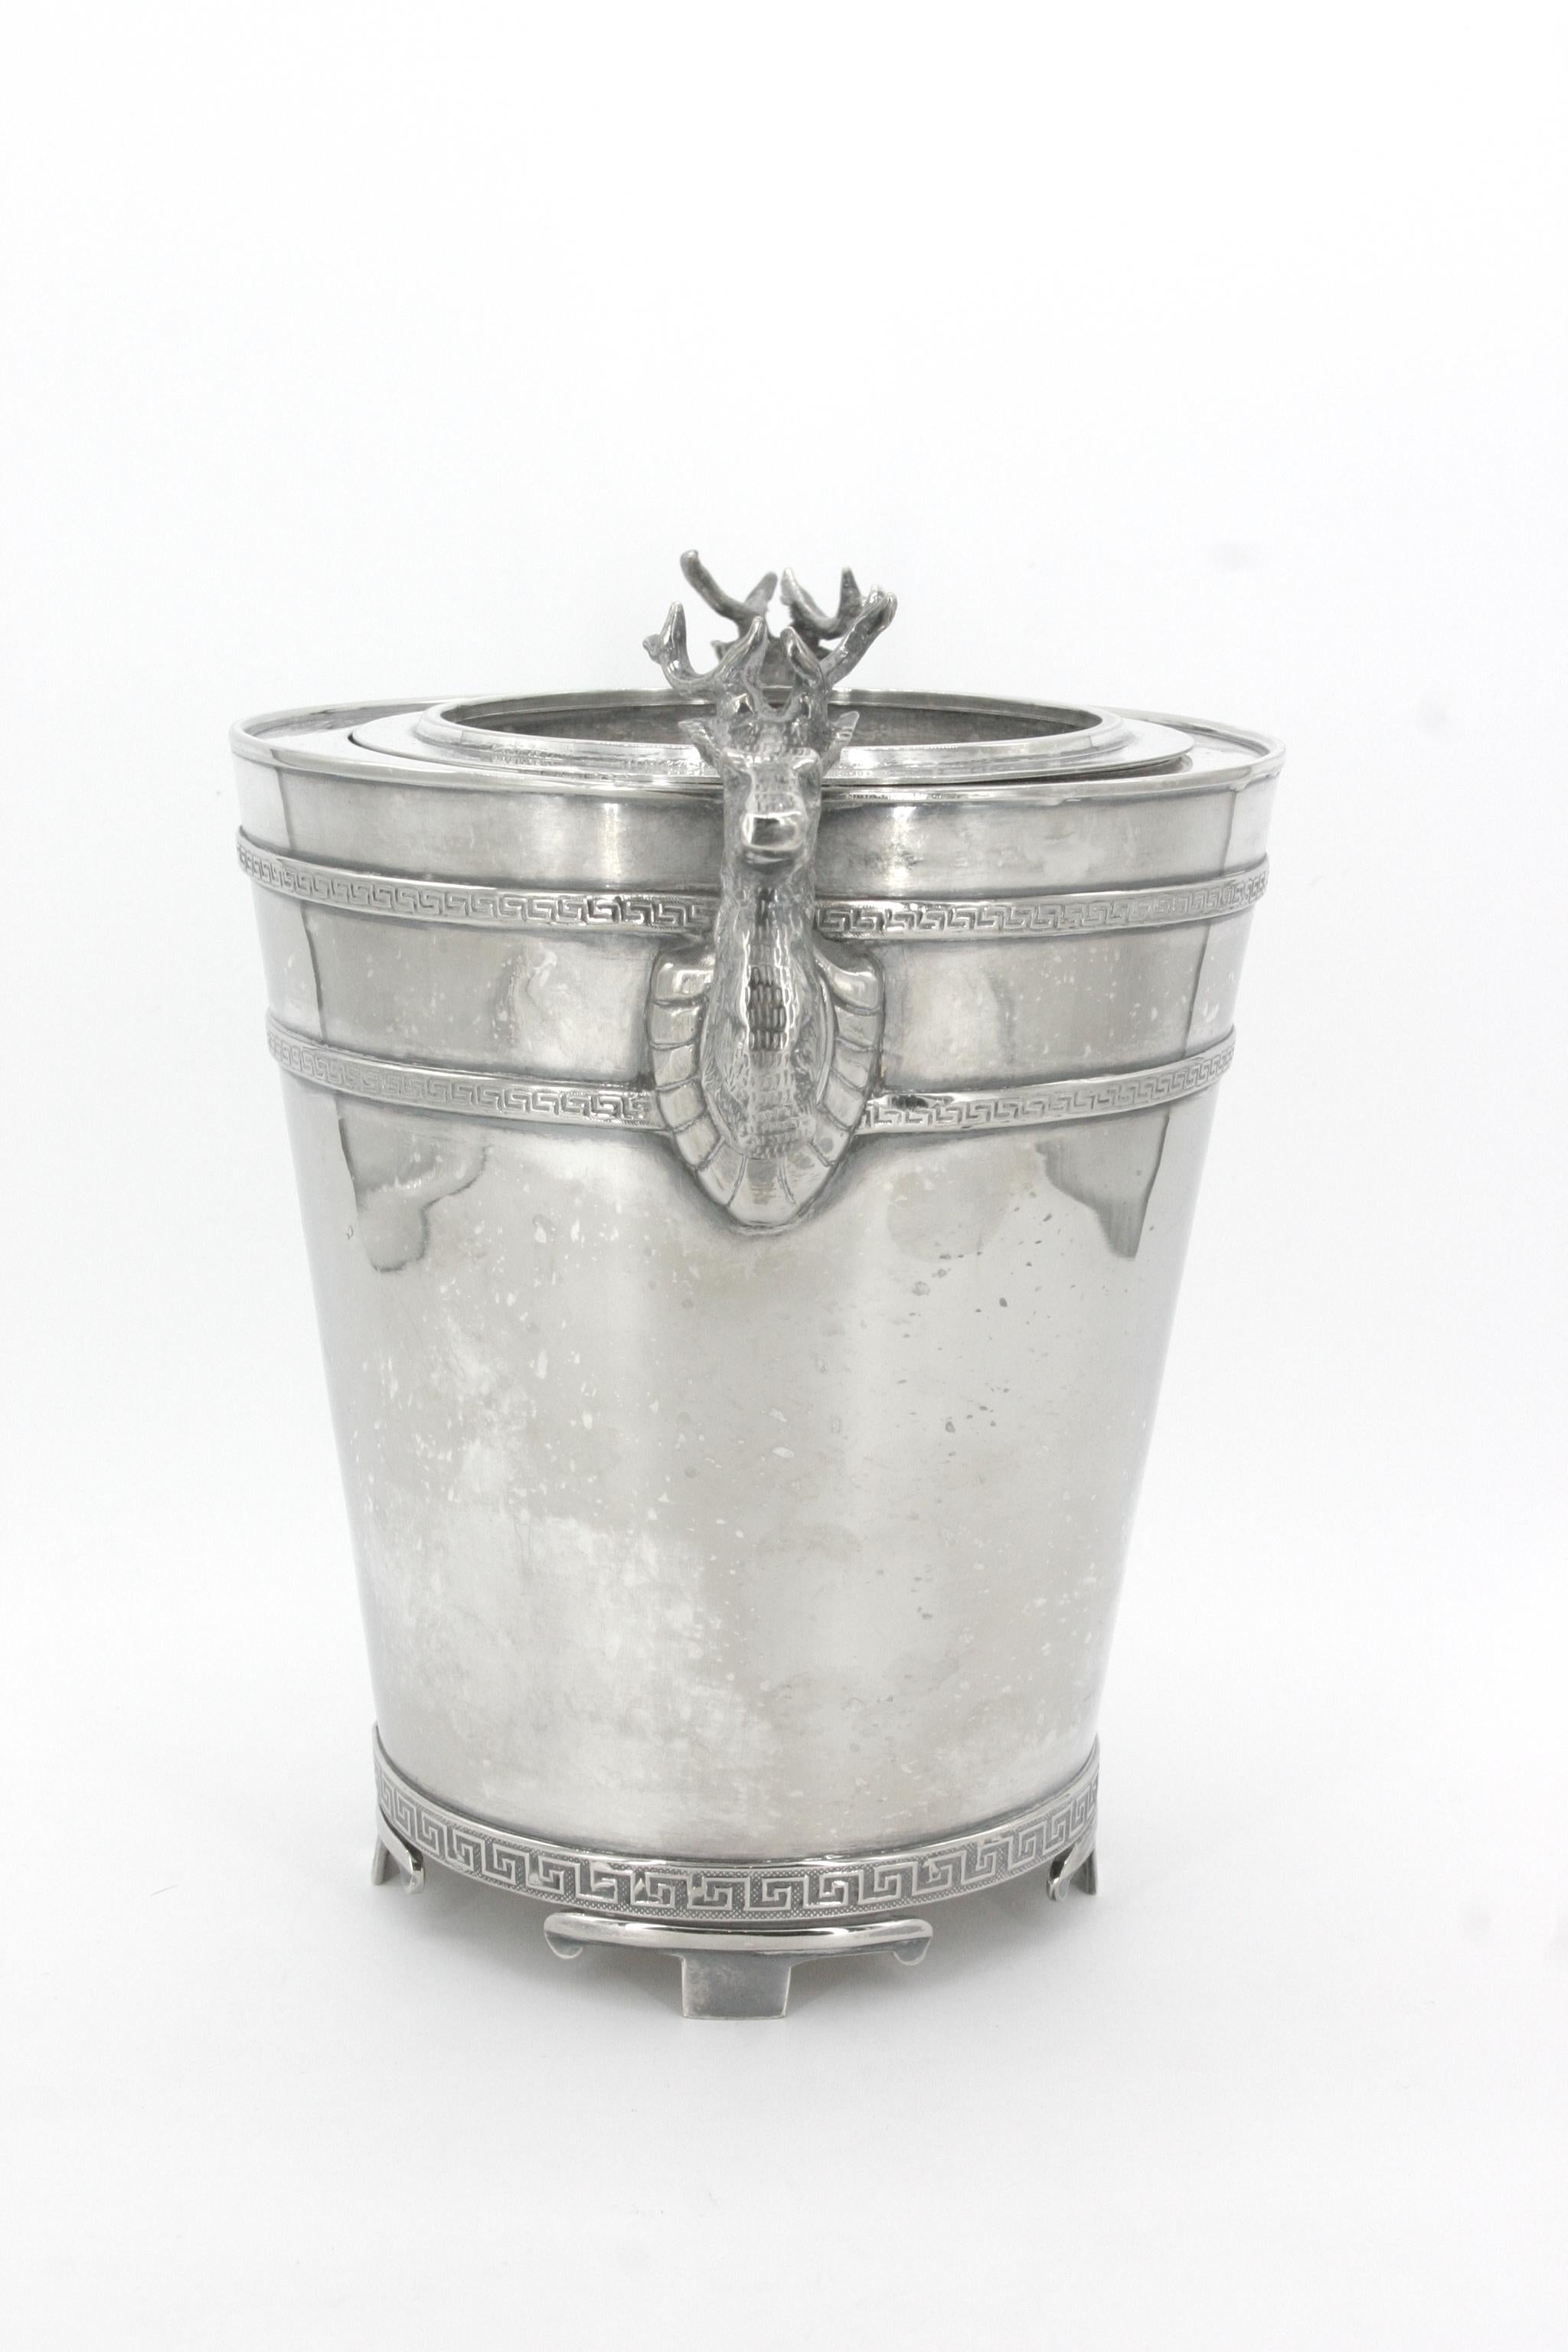 Mid 19th century English silver plated tableware / barware wine cooler or ice bucket with removable liner and Elk head side handles by Joseph Rodger and Son of Sheffield, England. The cooler is in great antique condition with minor wear appropriate